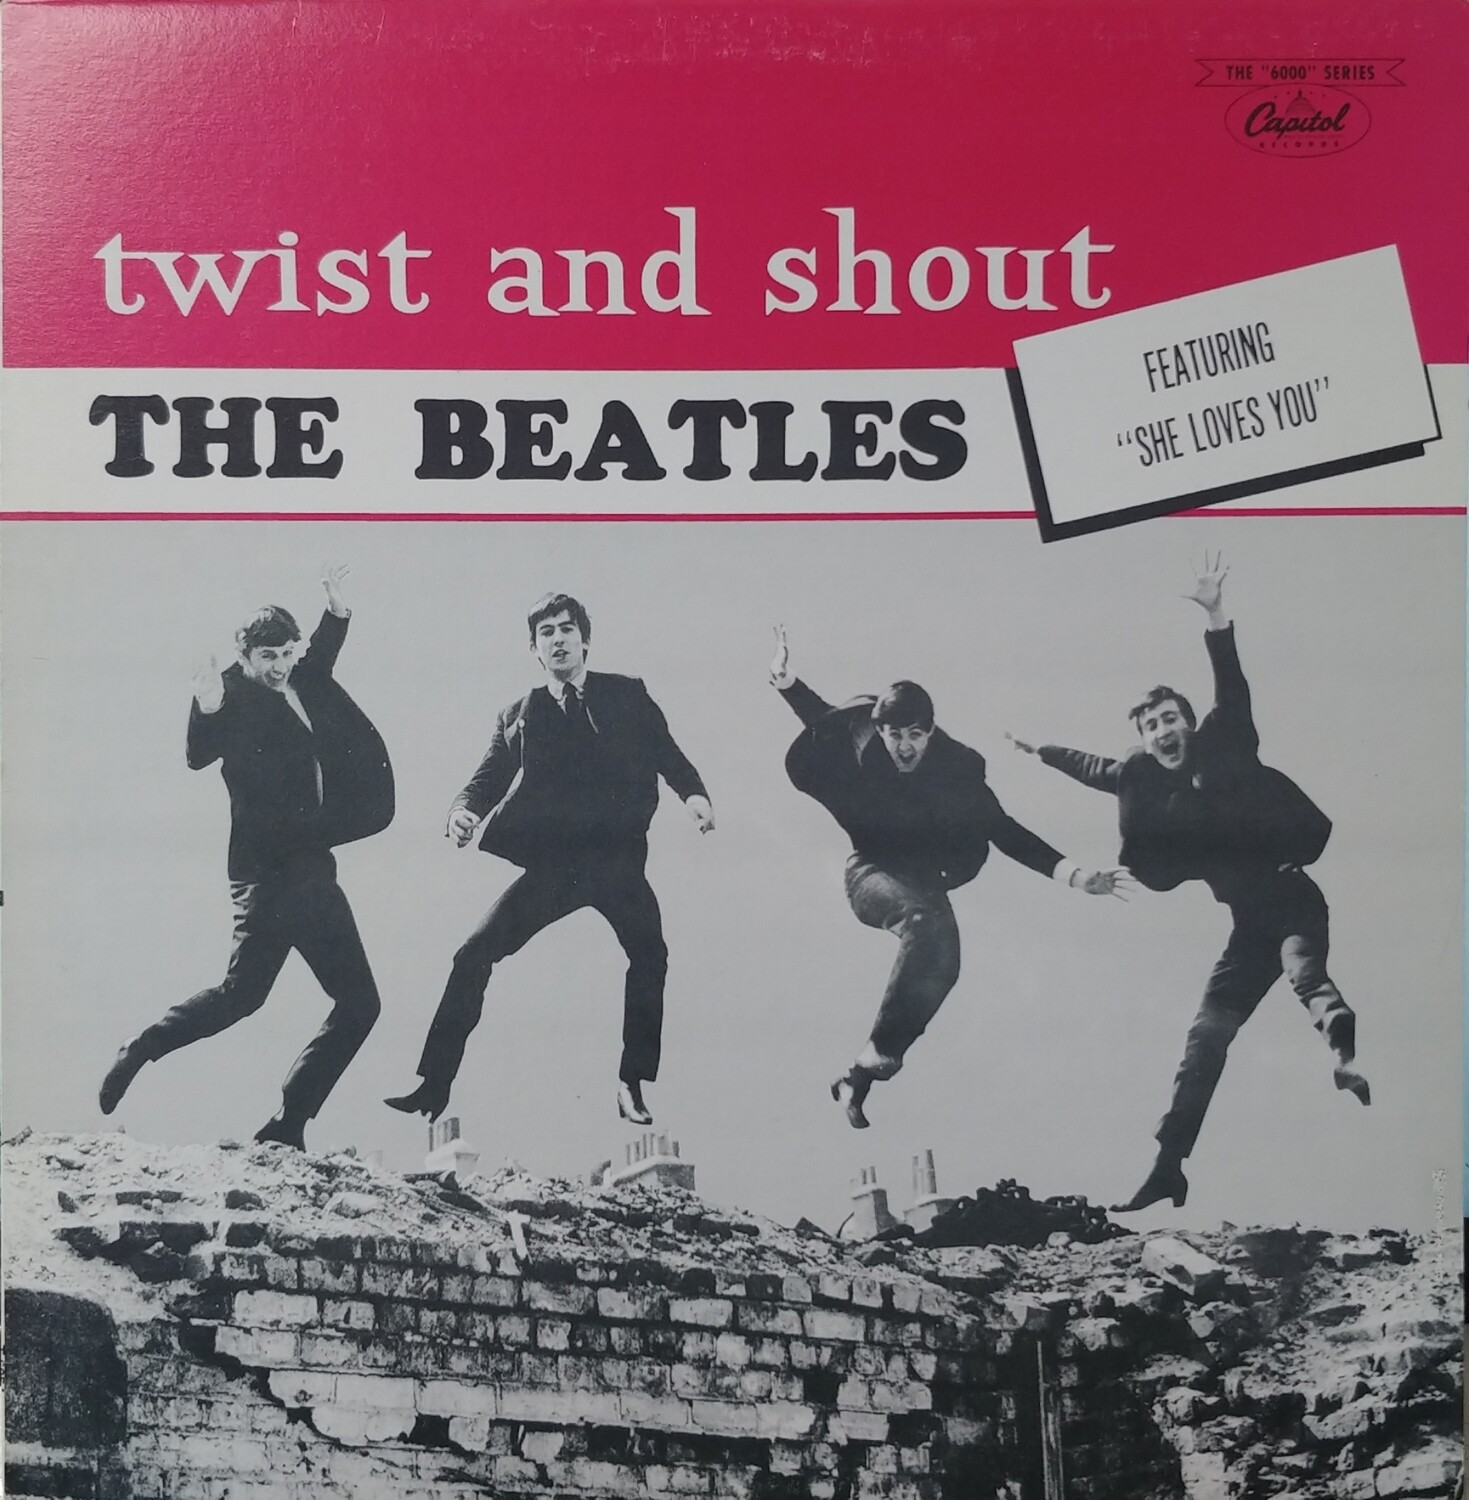 The Beatles - Twist and shout